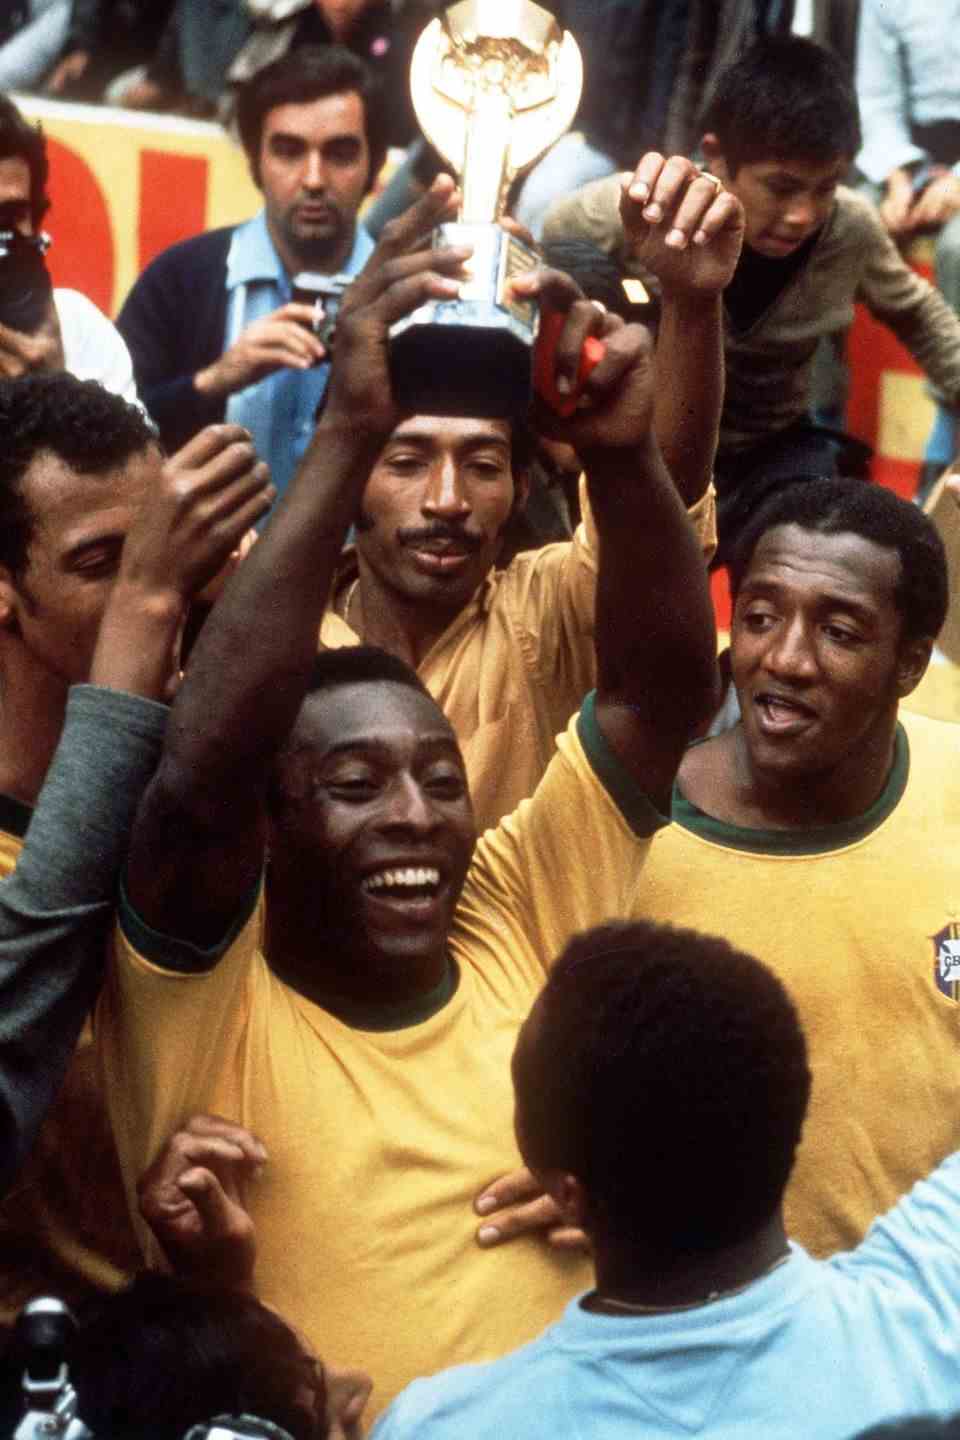 Pele with the 1970 World Cup trophy. When he holds up the trophy, he is not yet wearing a sombrero.